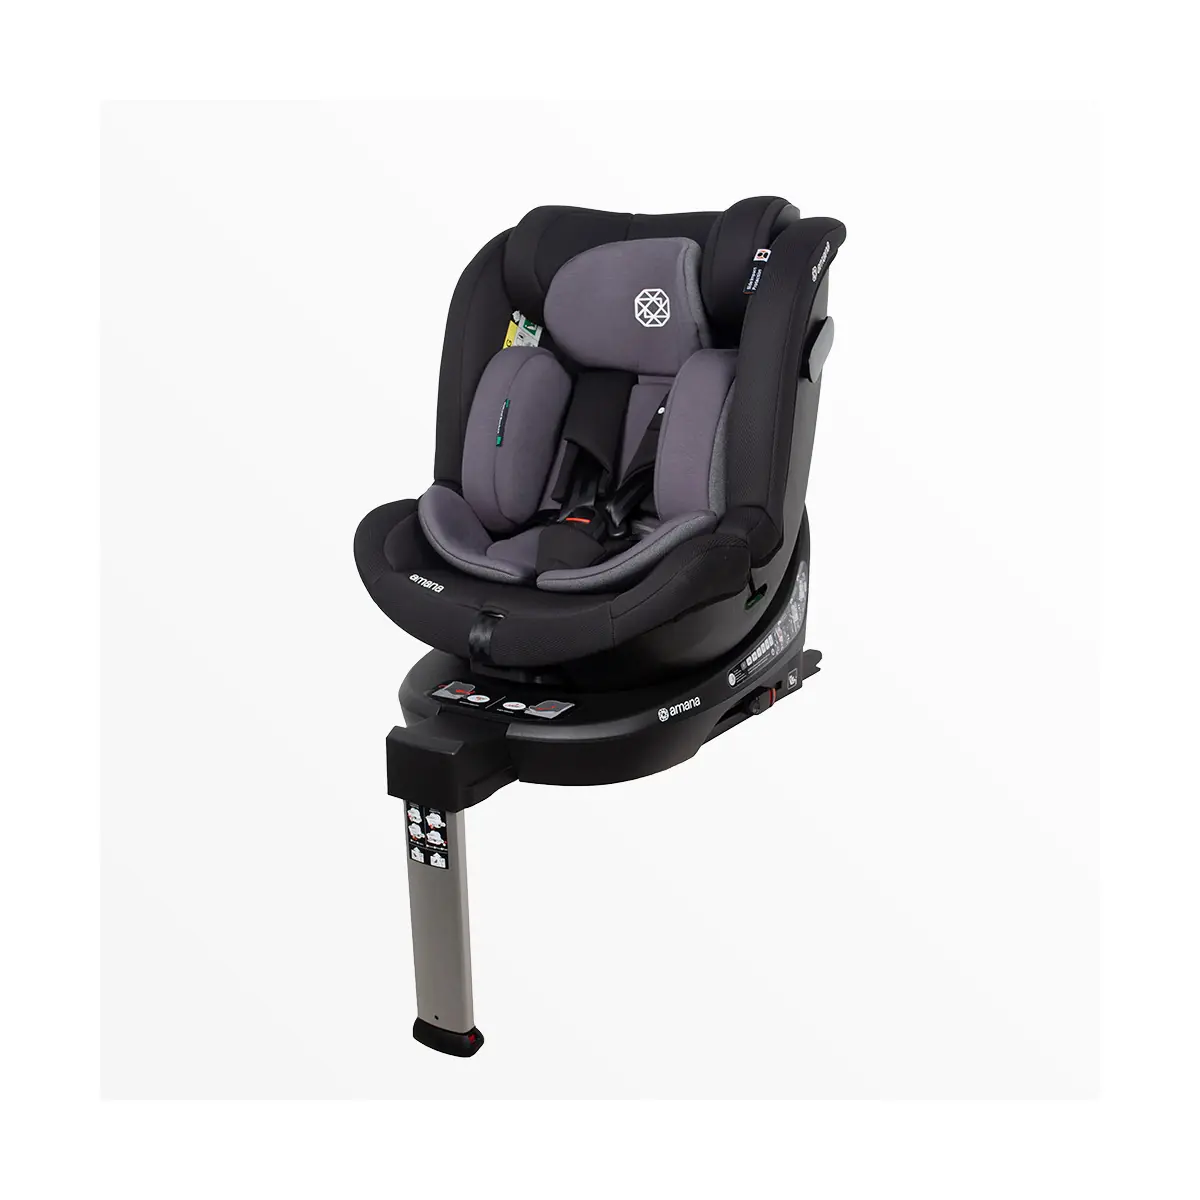 Image of Amana Siena Twist 360 Spin i-Size Group 0+/1/2/3 Car Seat - Graphite (Exclusive to Kiddies Kingdom)